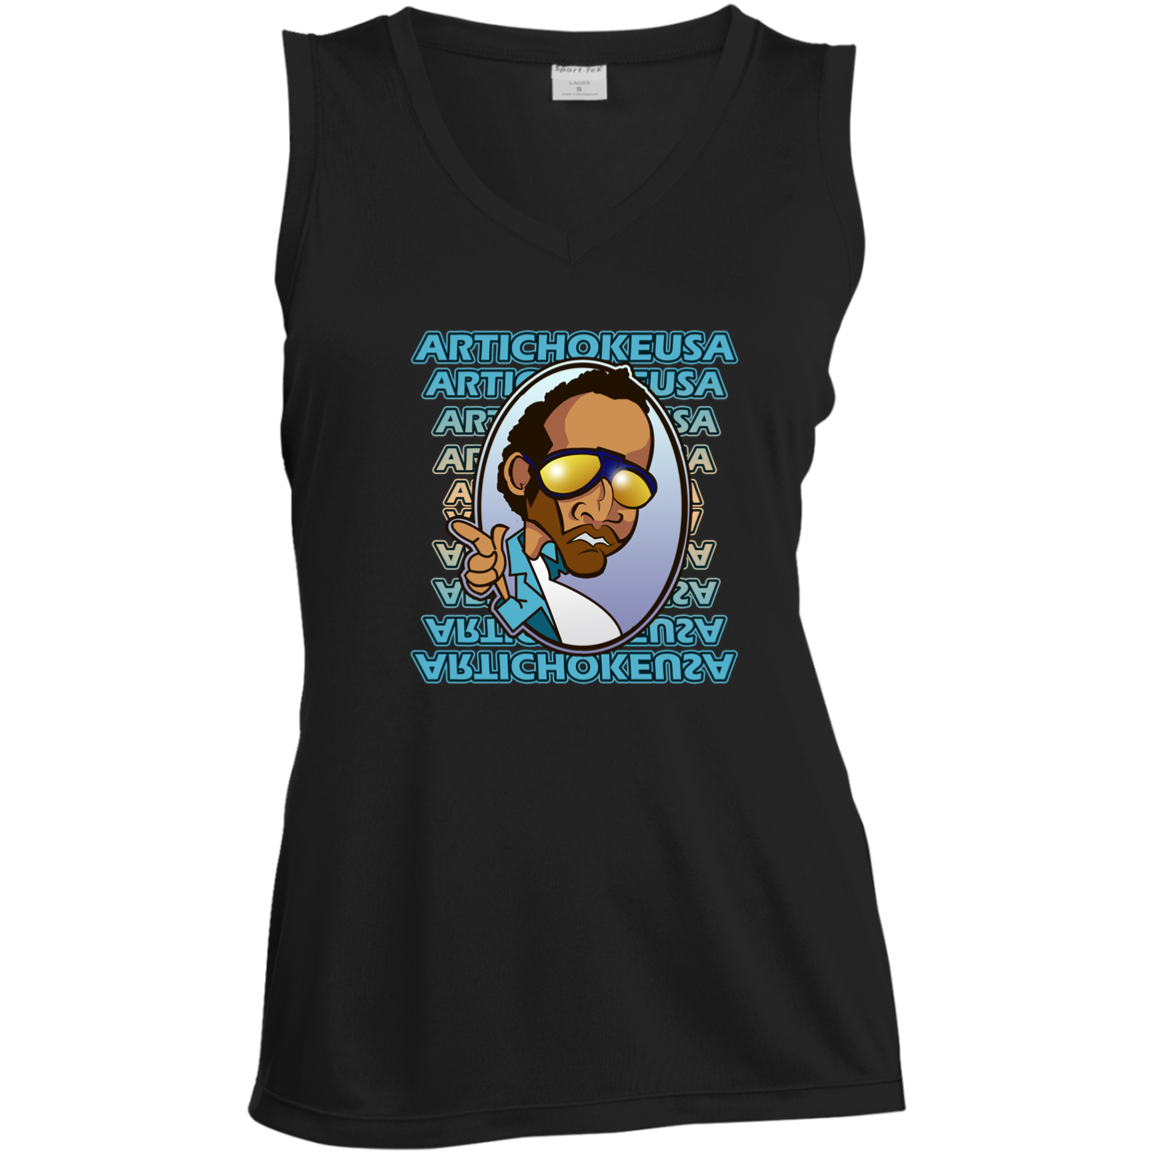 ArtichokeUSA Character and Font design. Let's Create Your Own Team Design Today. My first client Charles. Ladies' Sleeveless V-Neck